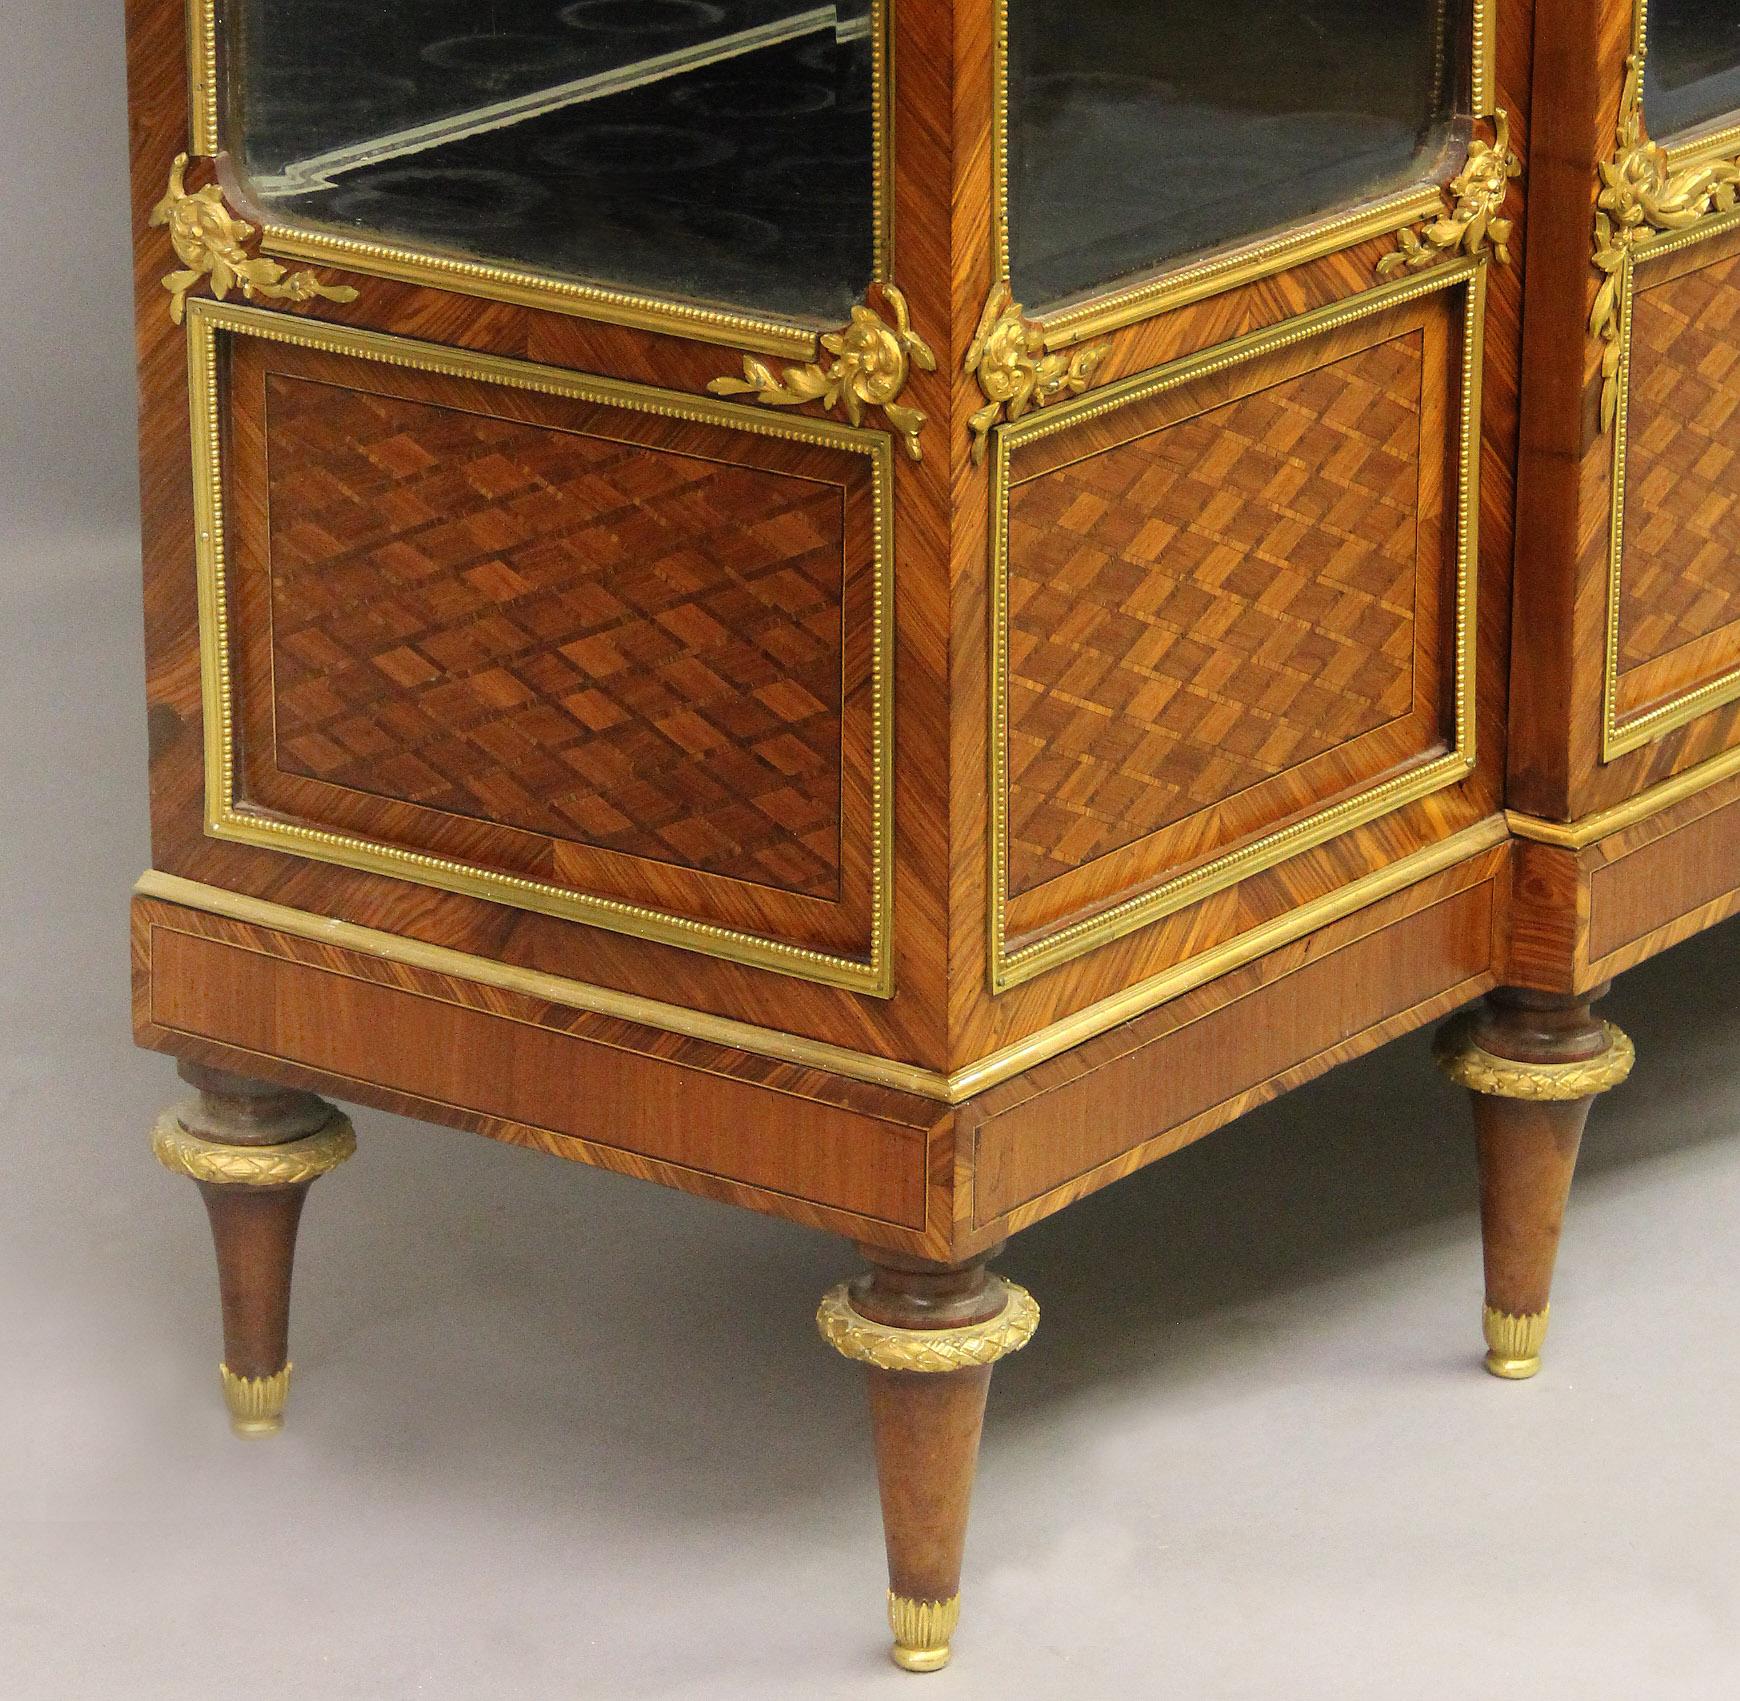 Marble Excellent Quality Late 19th Century Gilt Bronze and Wedgwood Mounted Vitrine For Sale